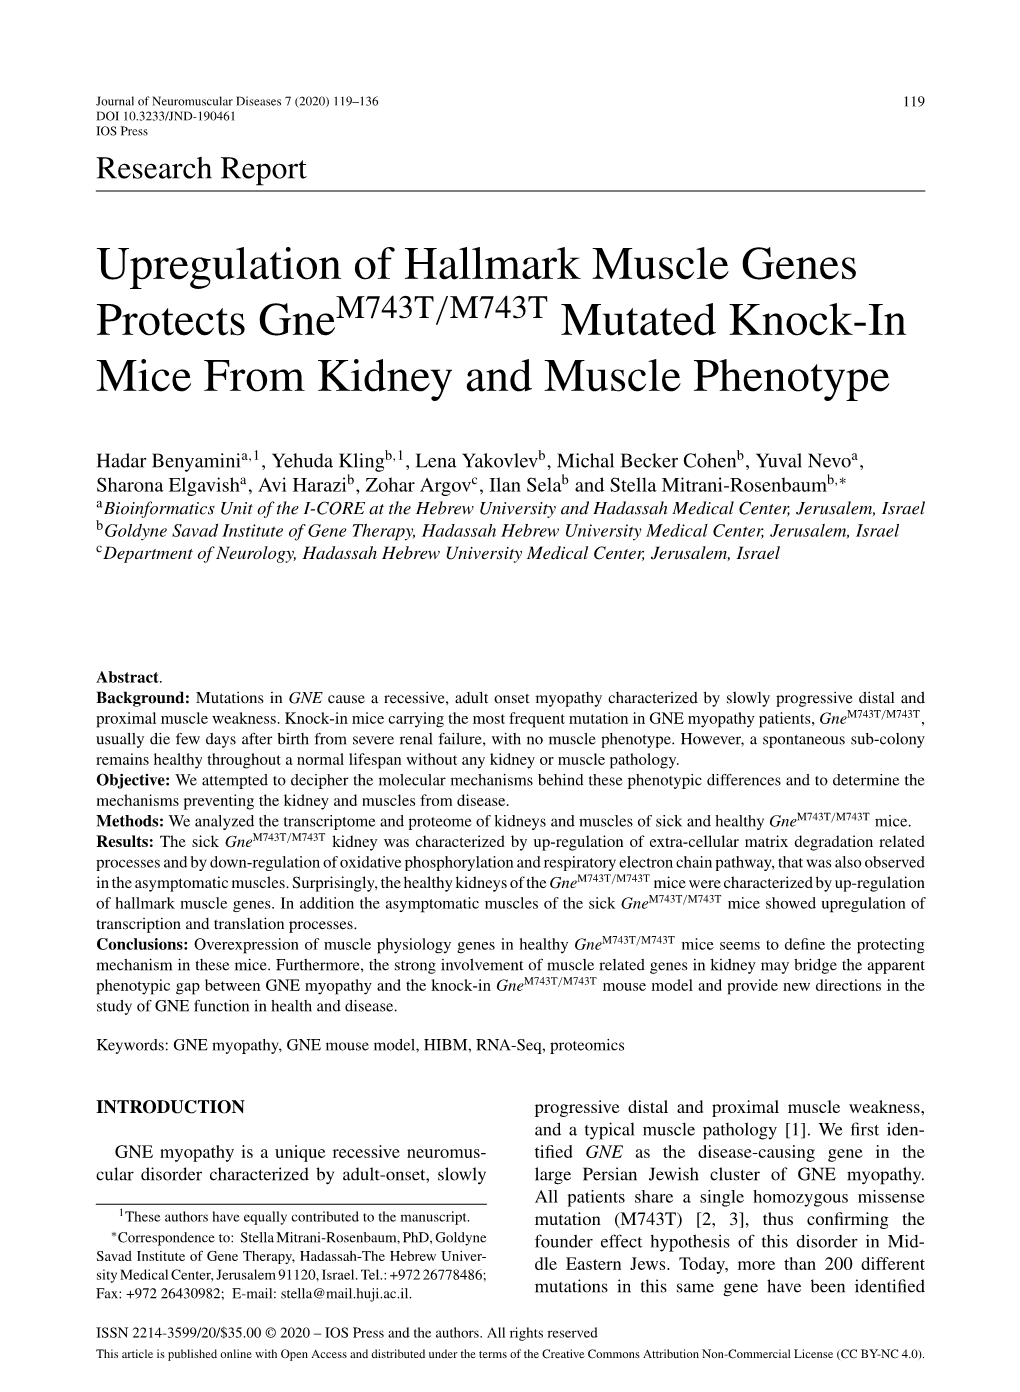 Upregulation of Hallmark Muscle Genes Protects Gne Mutated Knock